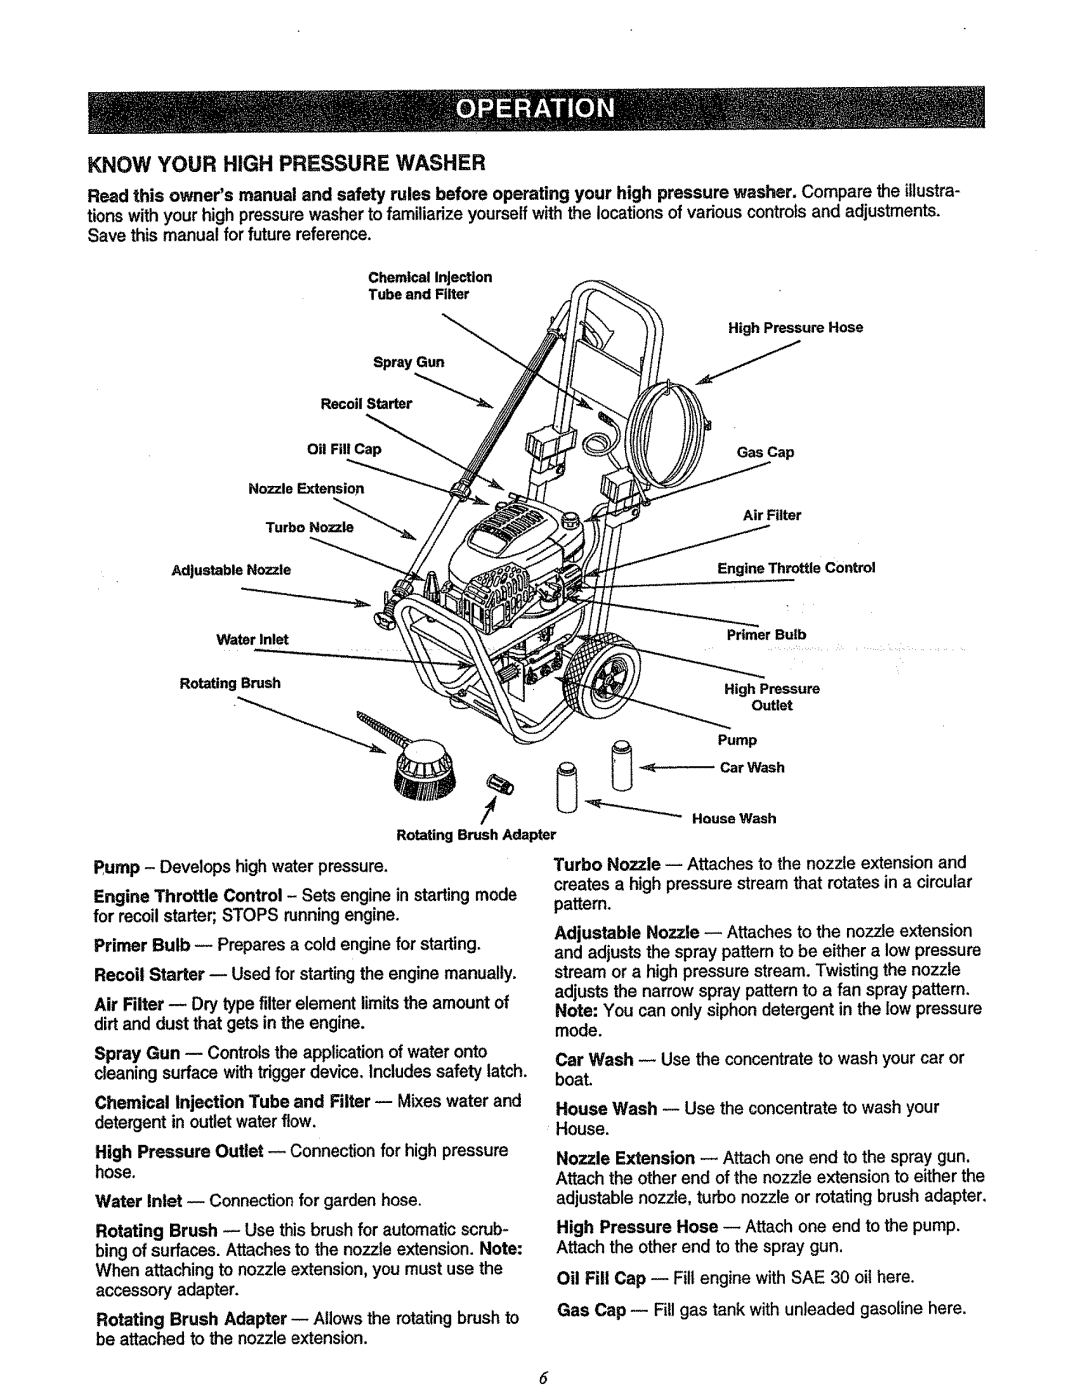 Craftsman 580.7622 manual Know Your High Pressure Washer 